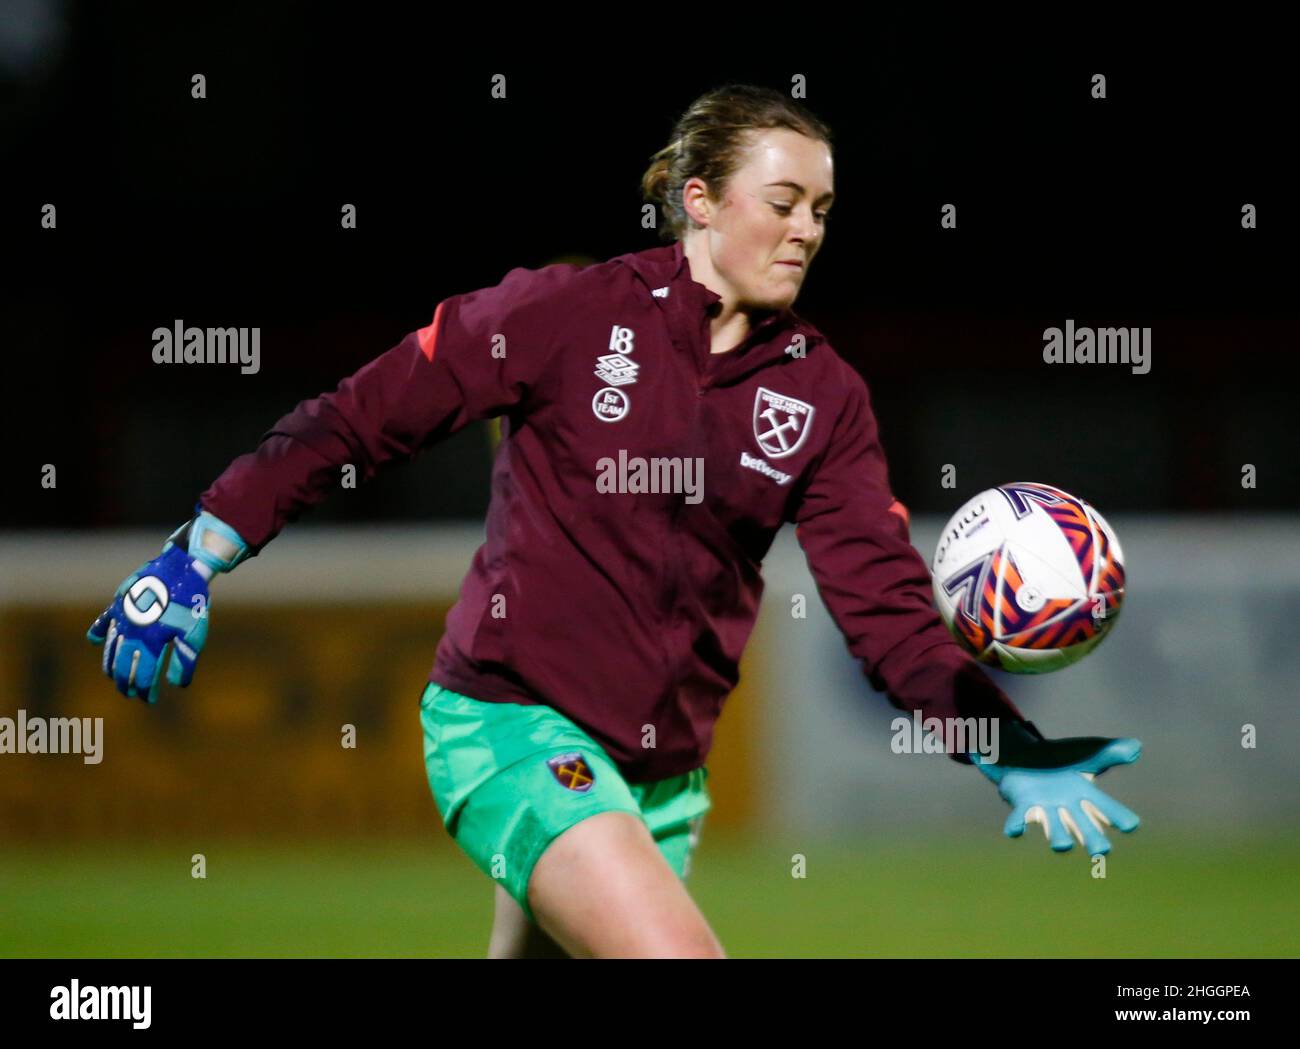 DAGENHAM, ENGLAND - JANUARY 19: Anna Leat of West Ham United WFC  during the pre-match warm-up   during  FA Women's Continental  League Cup Quarter Fi Stock Photo